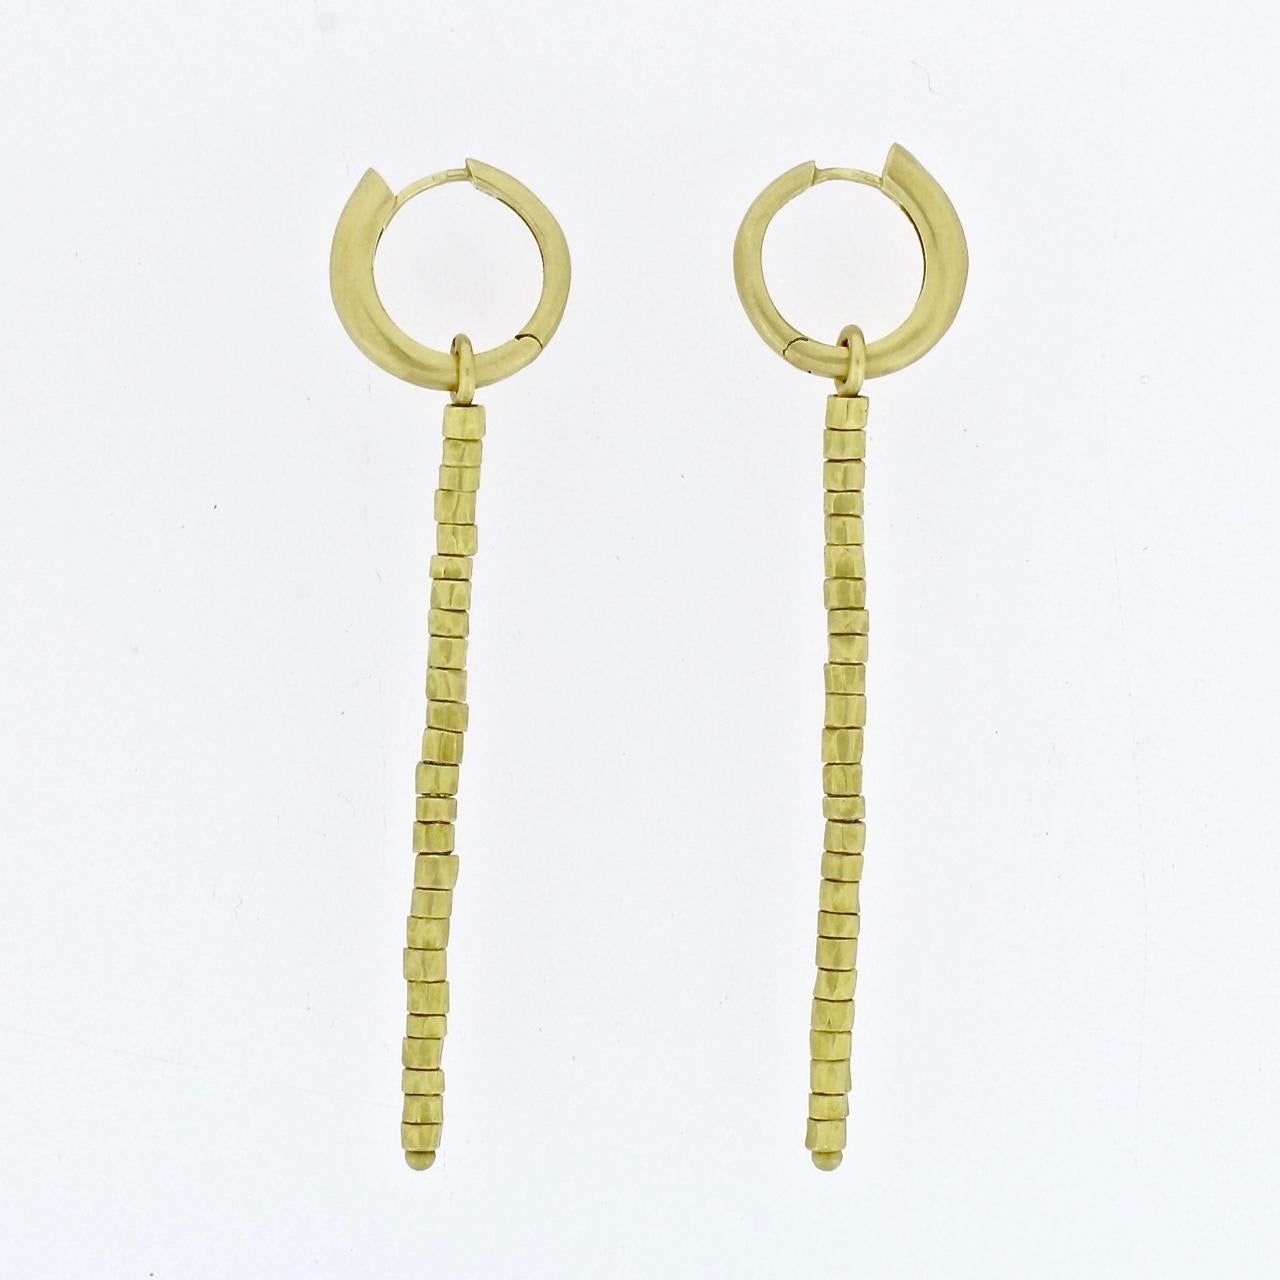 A fine pair of 18-karat 'Golden Beads' hoop and tassel earrings by H Stern.

Elegant in their reduced form and matte gold finish.

Marked to the hoop with the HS maker's mark and the Israeli harp hallmark for .750 fineness.

Length: just under 3